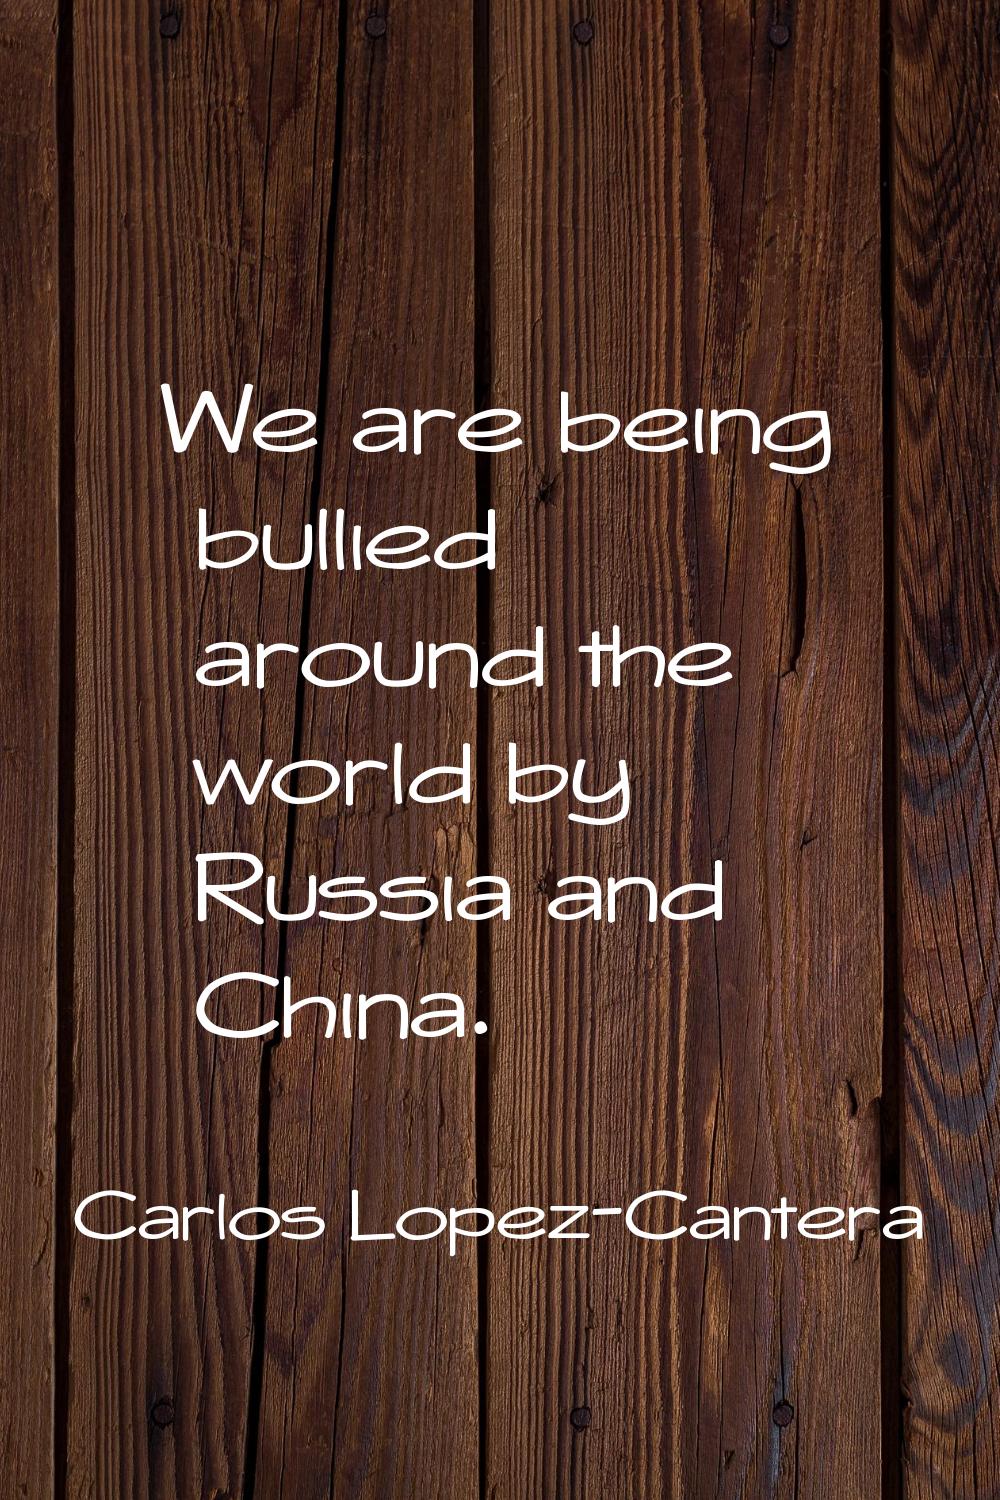 We are being bullied around the world by Russia and China.